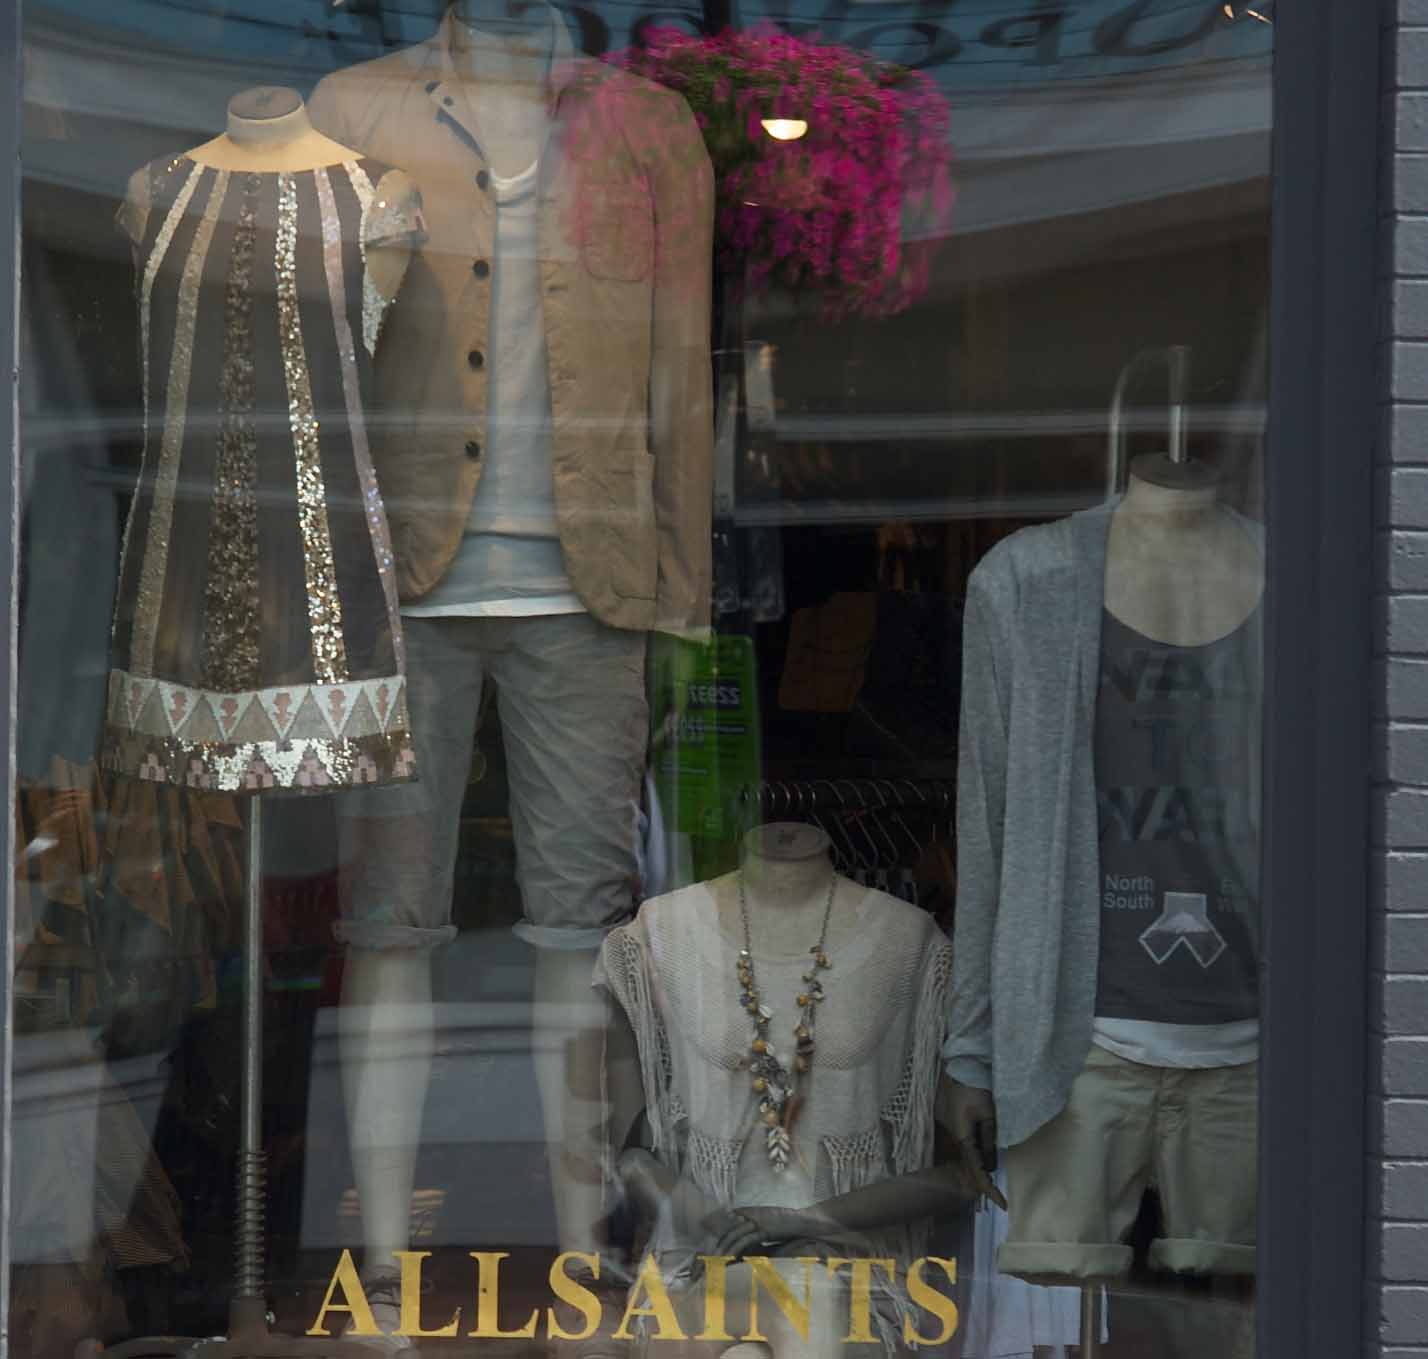 AllSaints opens its first store in DC